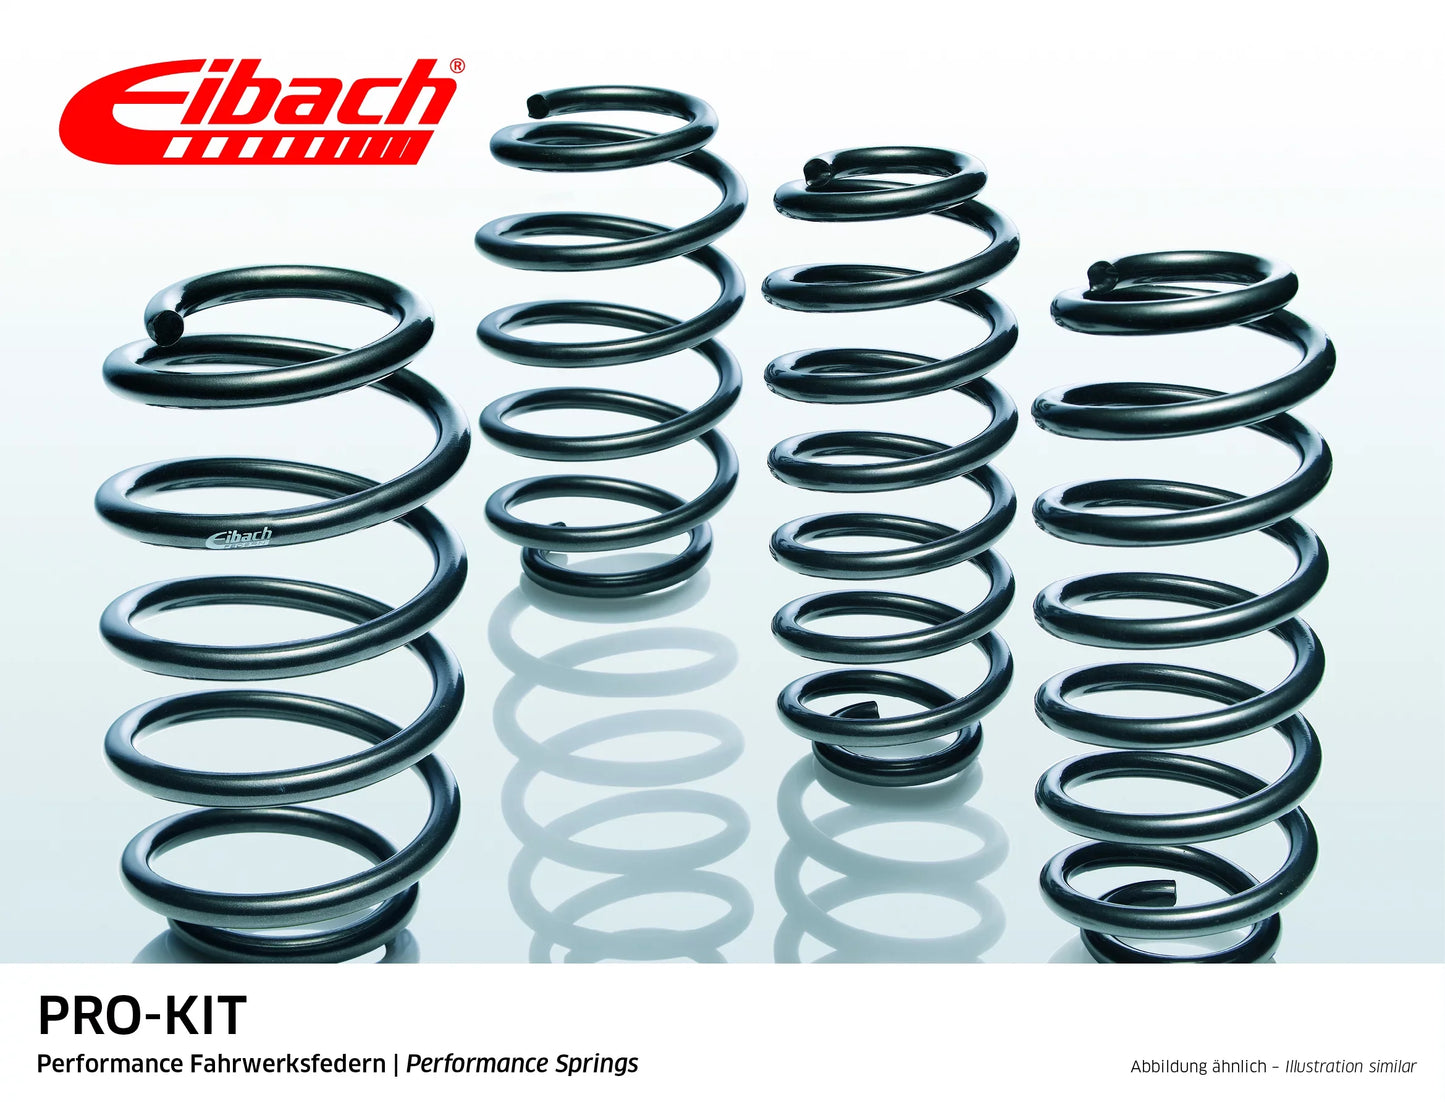 Eibach Pro-Kit Lowering Springs (E10-15-010-08-22) at £300.36